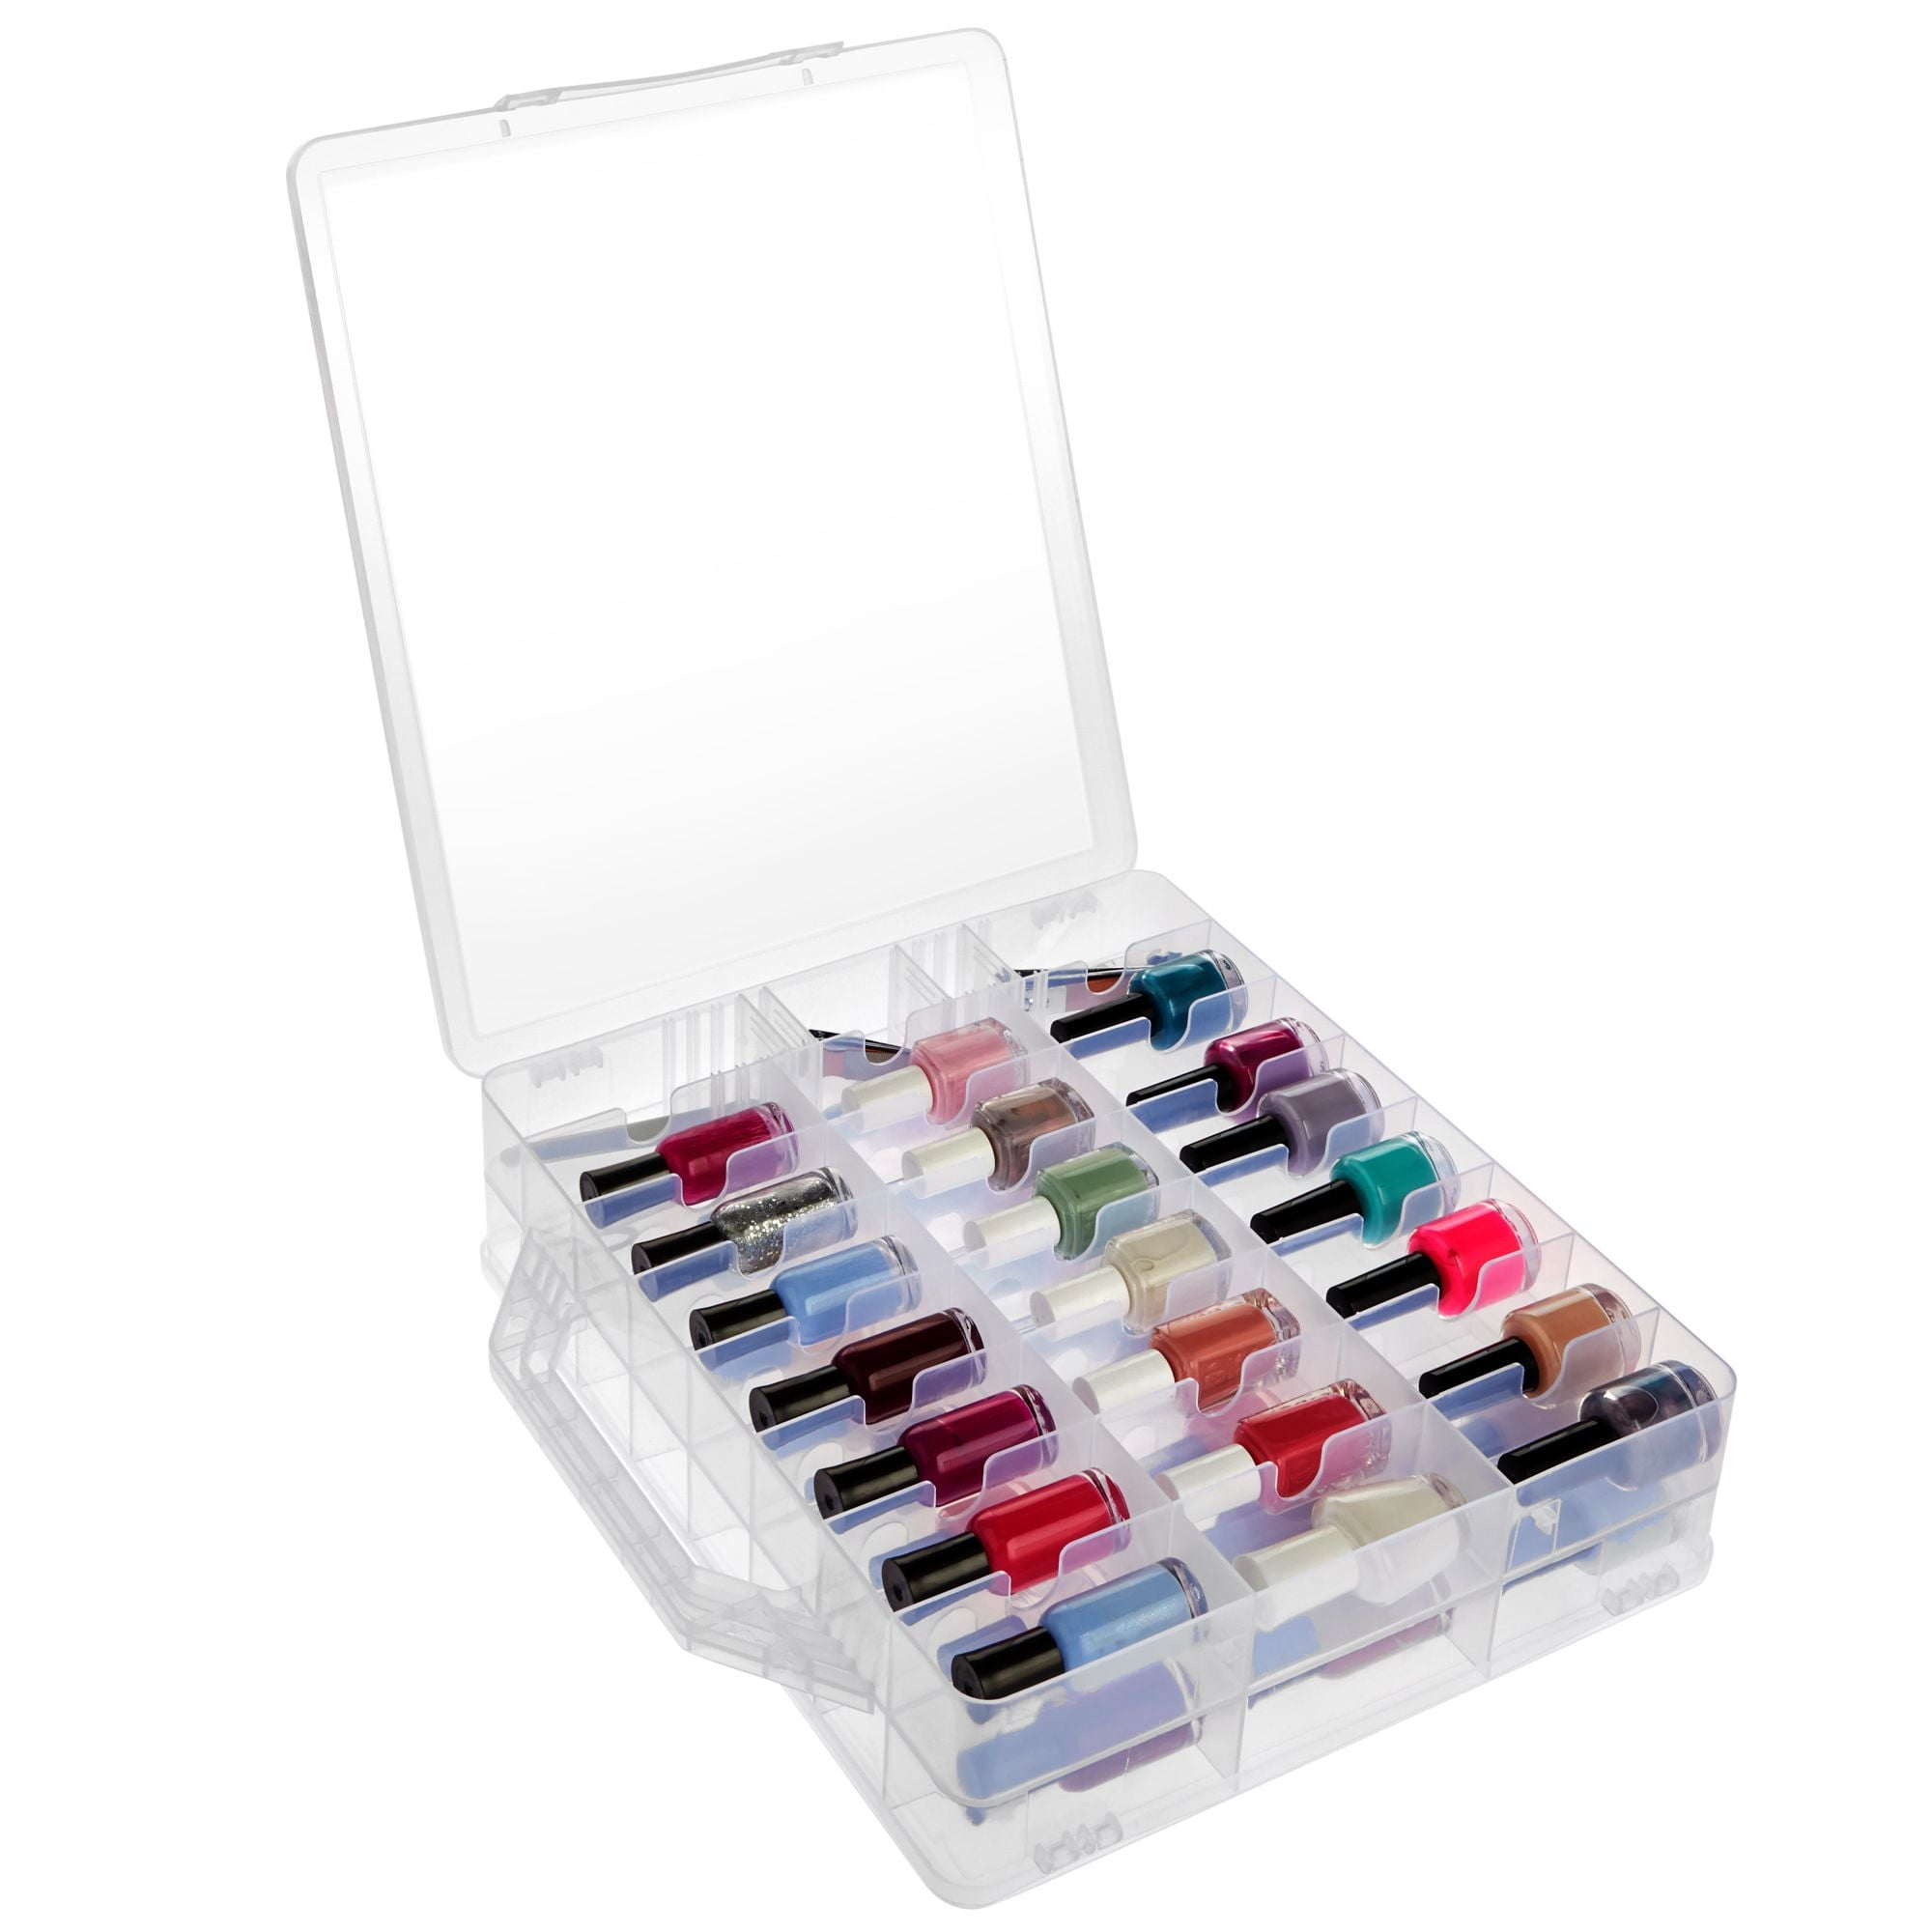 DreamGenius Gel Nail Polish Organizer Case for 48 Bottles, Double Side  Holder with Adjustable Dividers, Portable